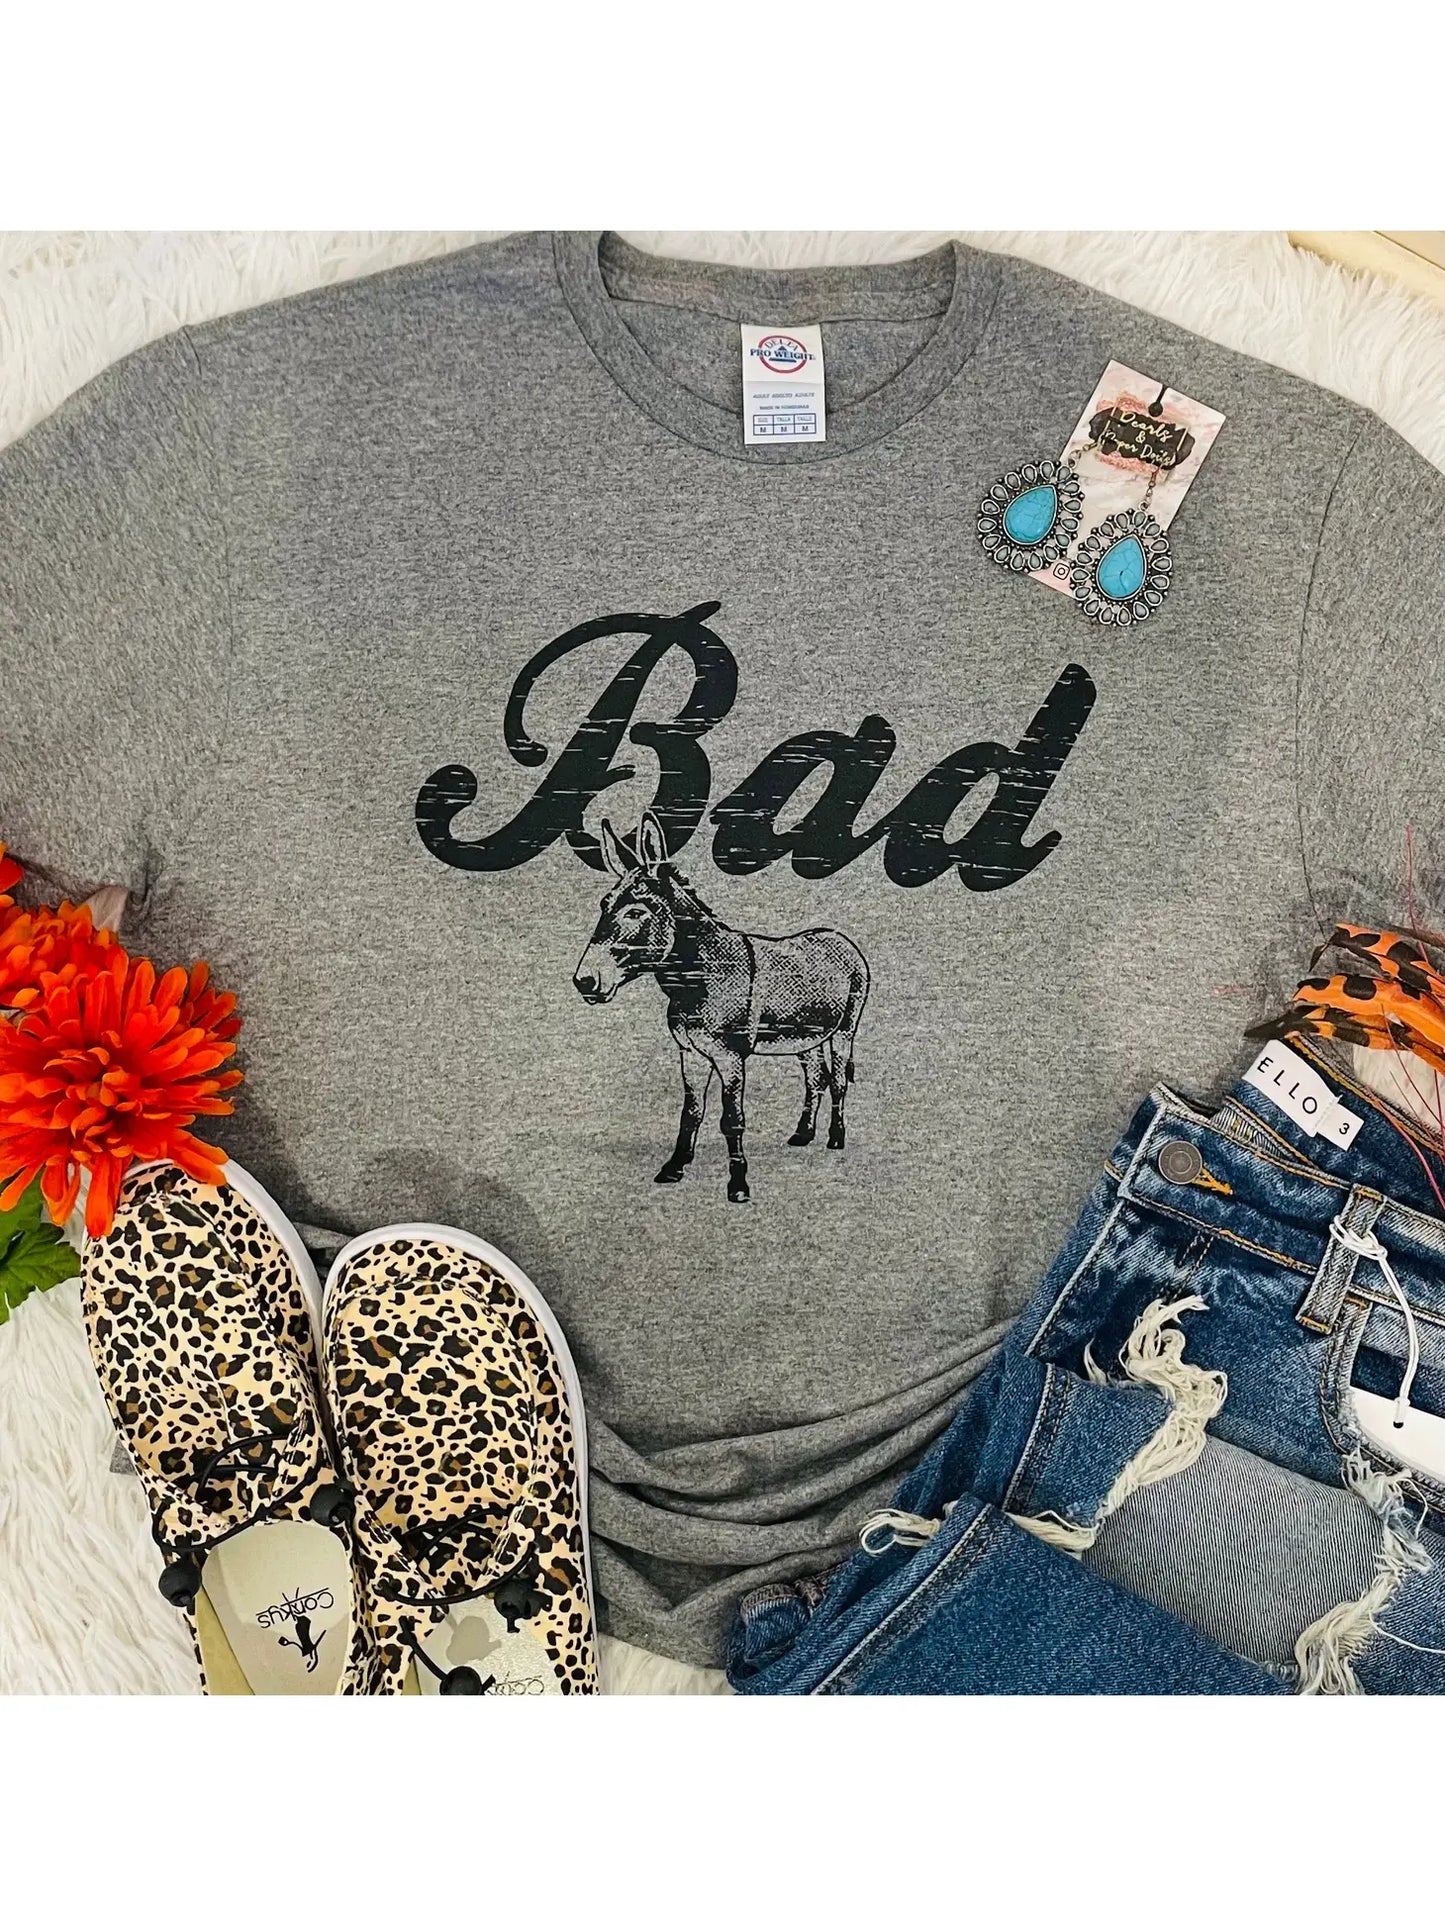 Bad Ass Graphic Tee - The Salty Mare